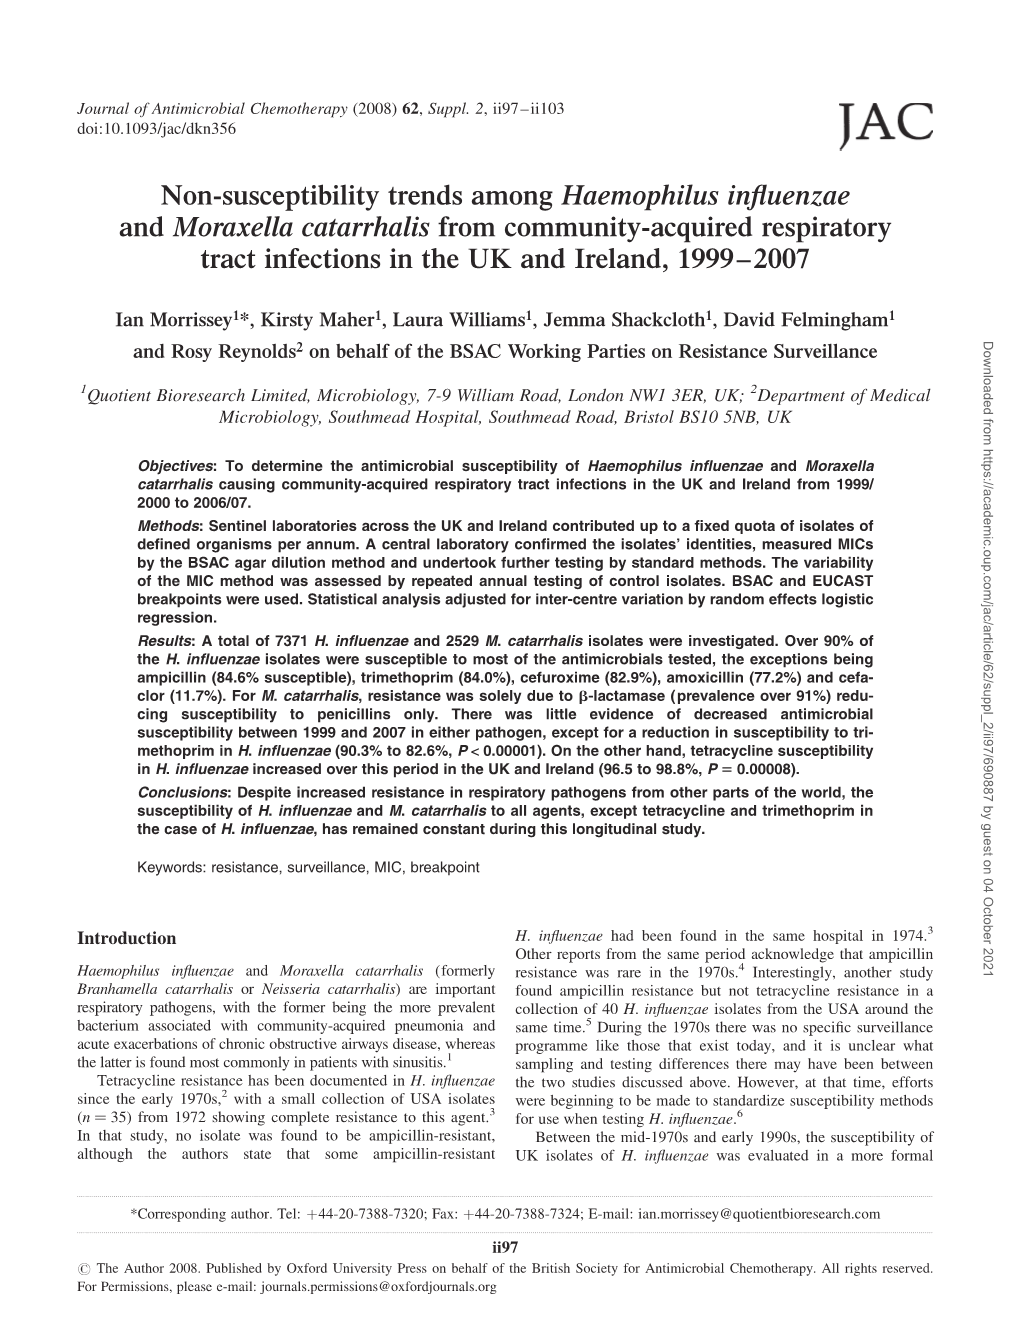 Non-Susceptibility Trends Among Haemophilus Influenzae And